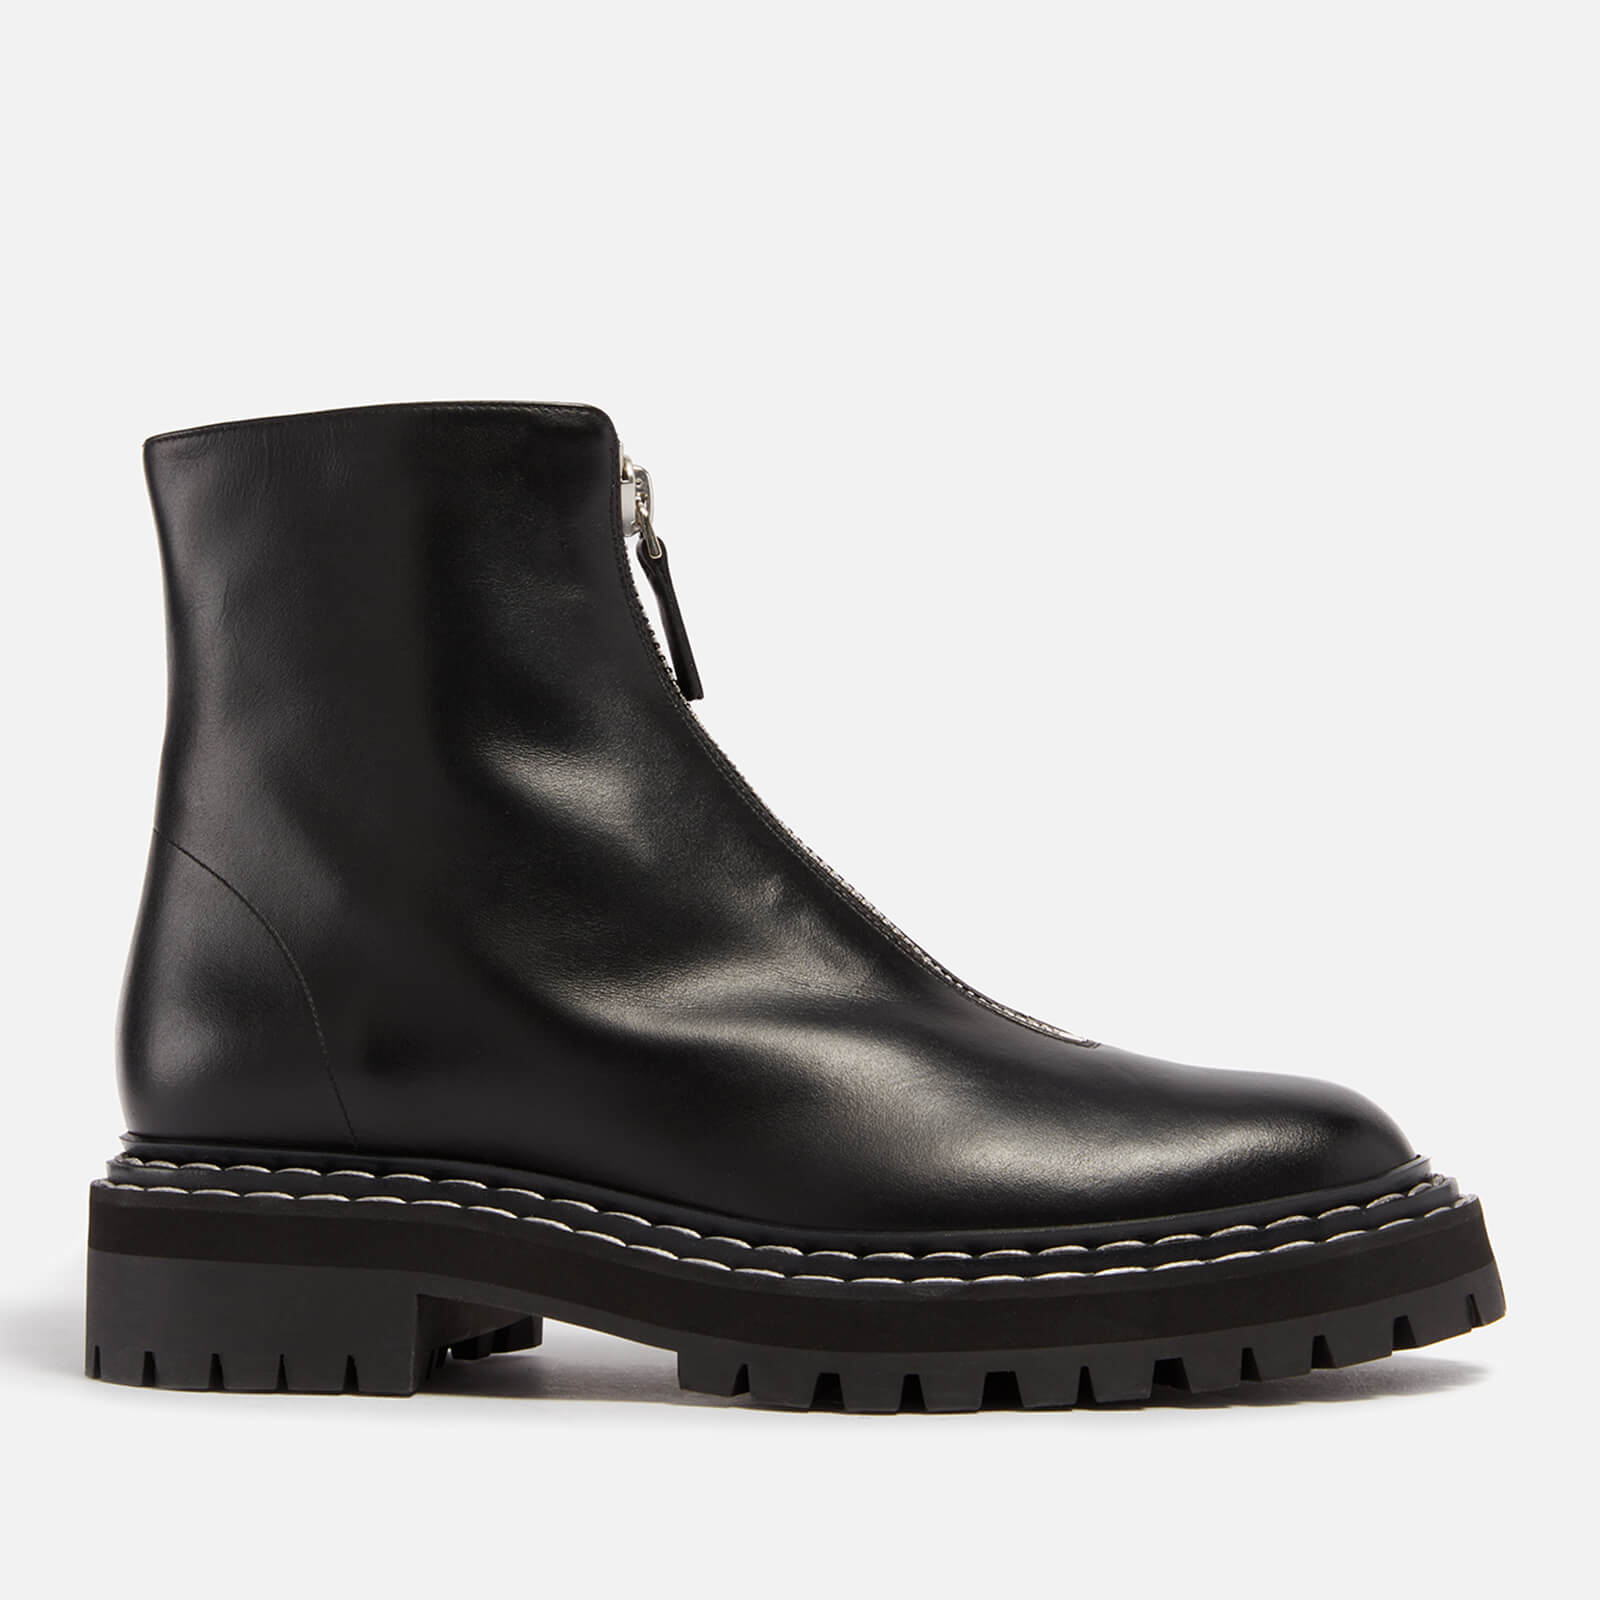 Proenza Schouler Lug Leather Ankle Boots - UK 3